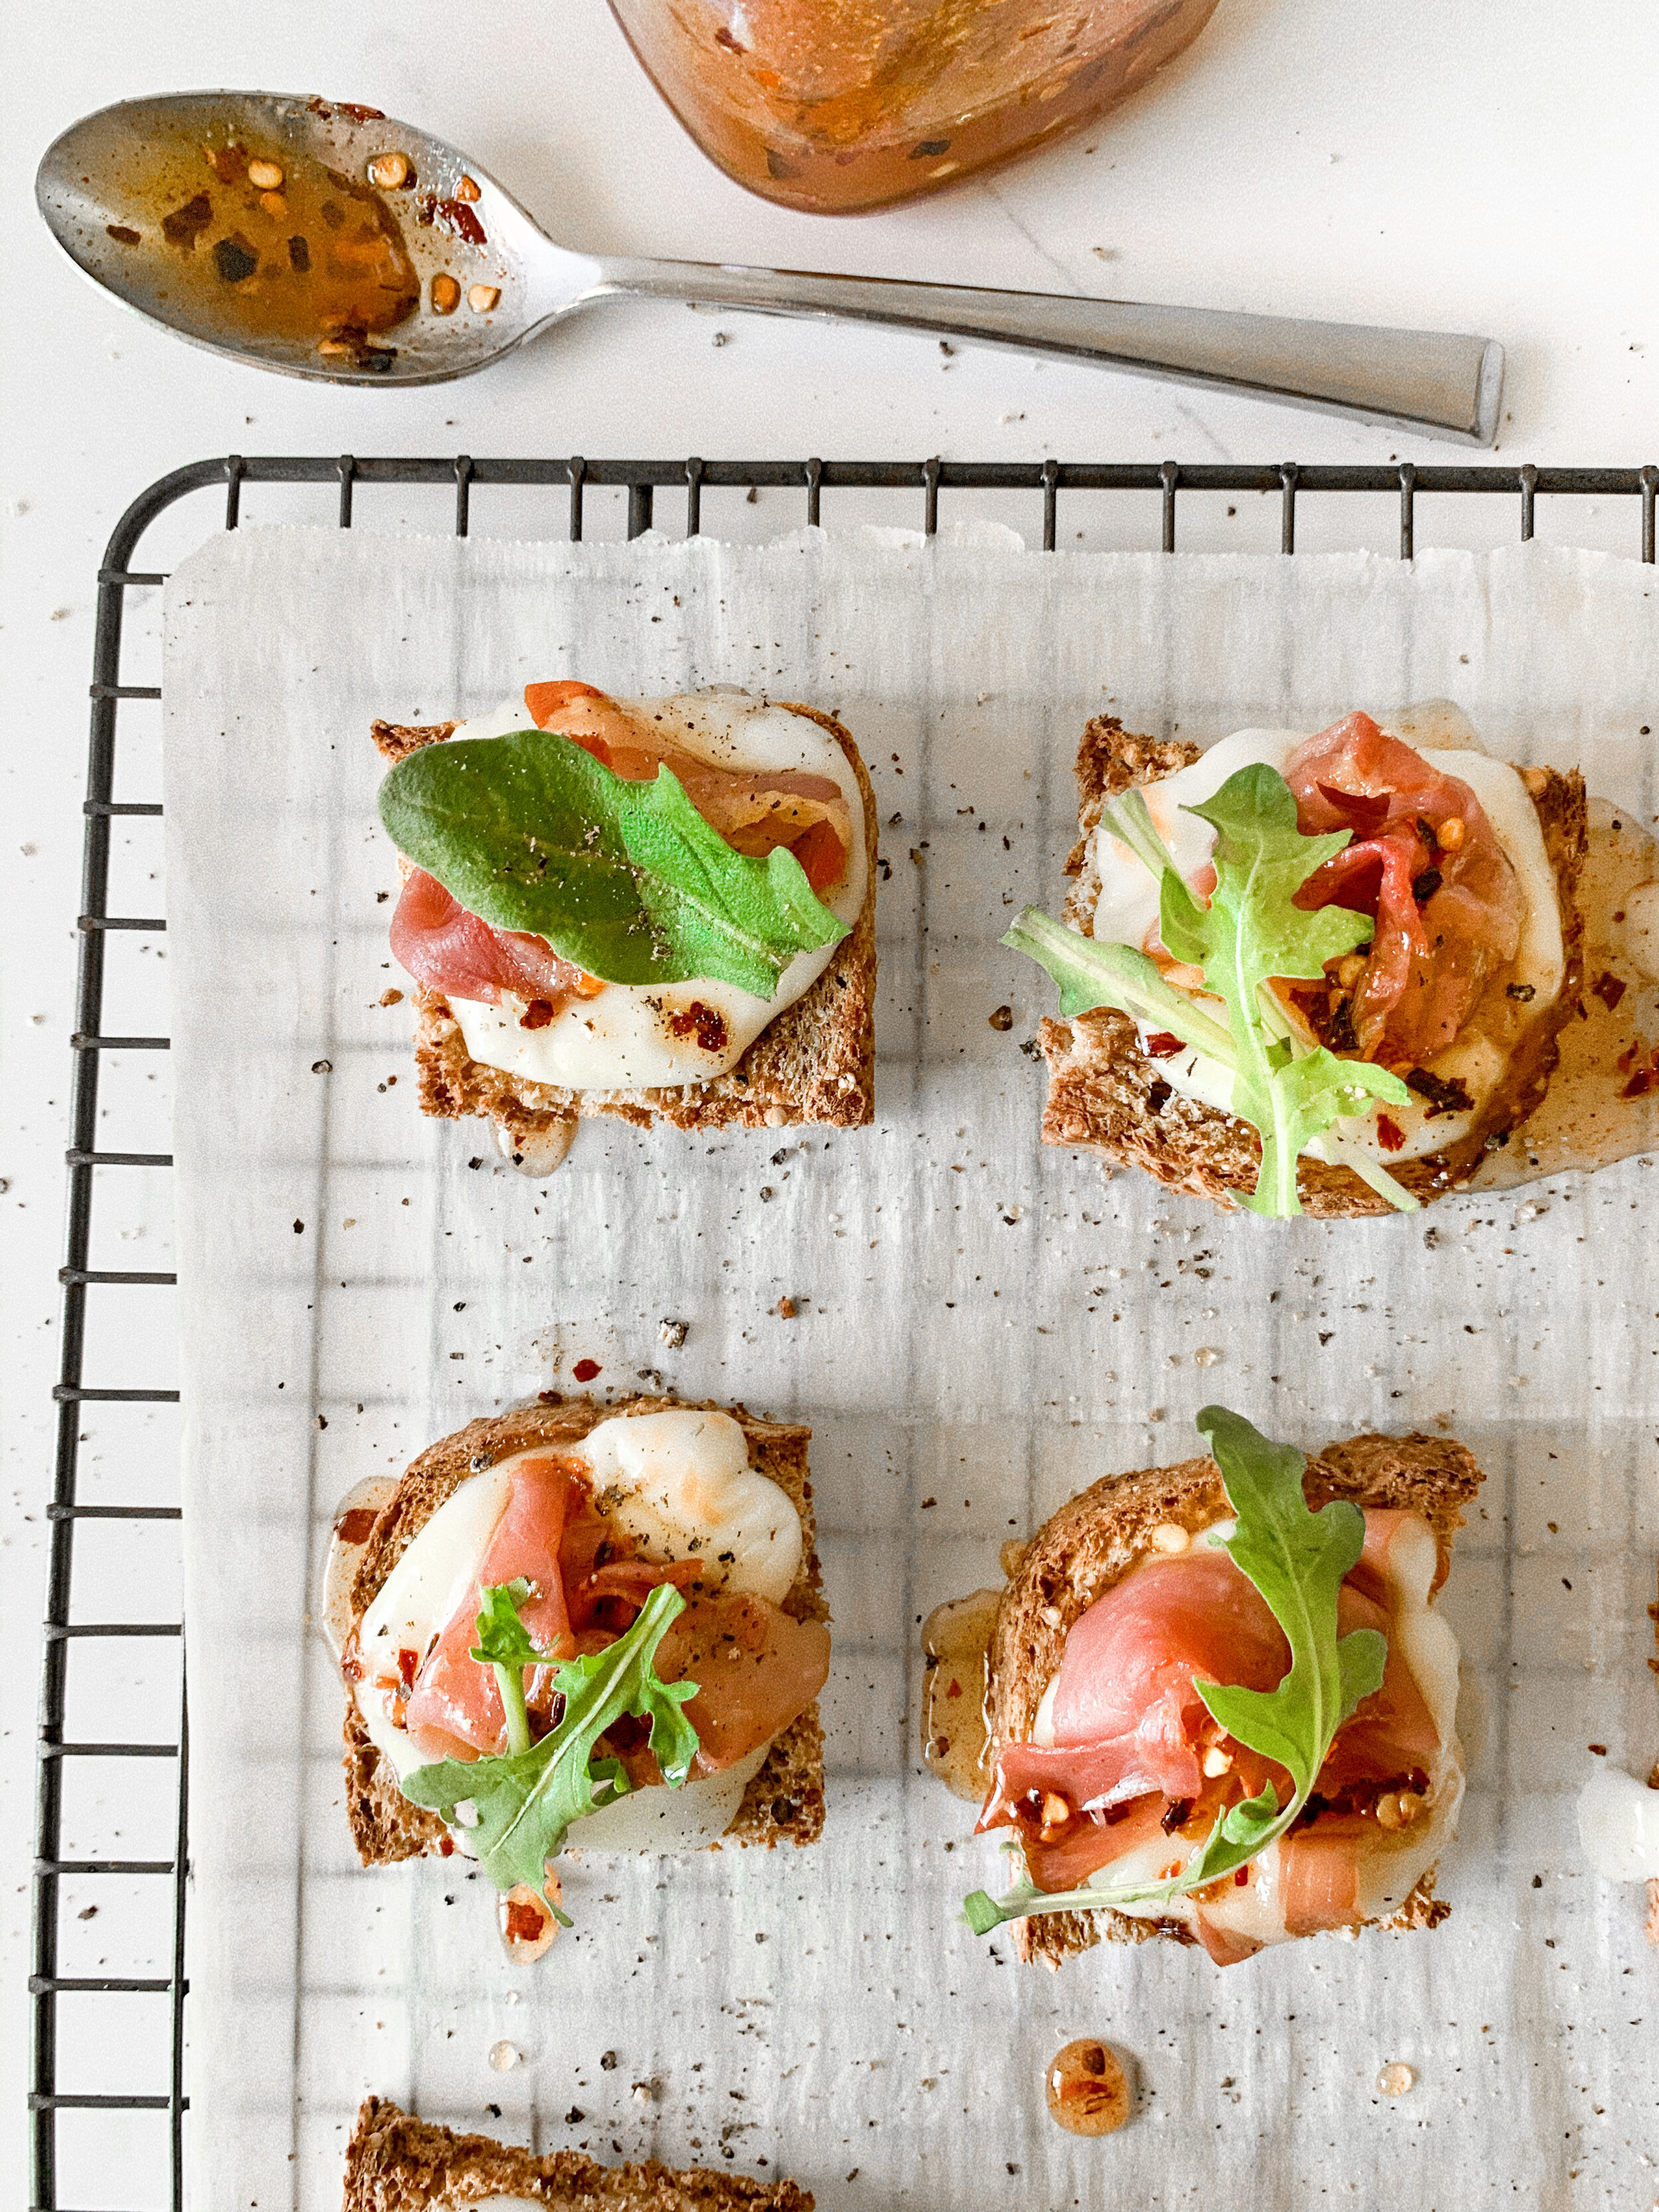 Topping off the freshly baked pizza bites with fresh arugula